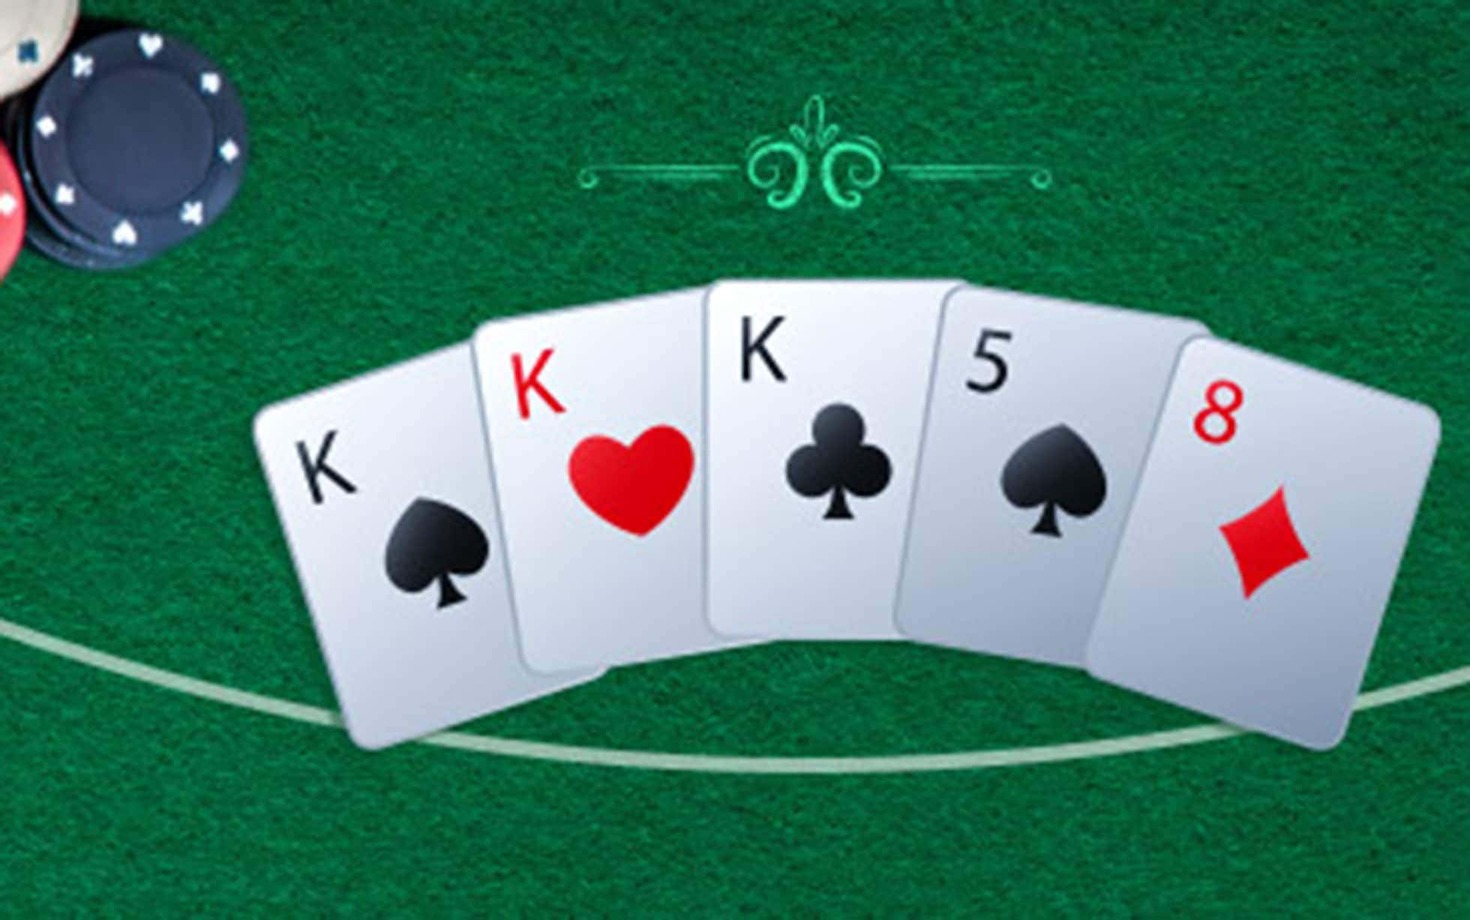 What is the Probability That a Five-Card Poker Hands Does Not Contain the Queen of Hearts?